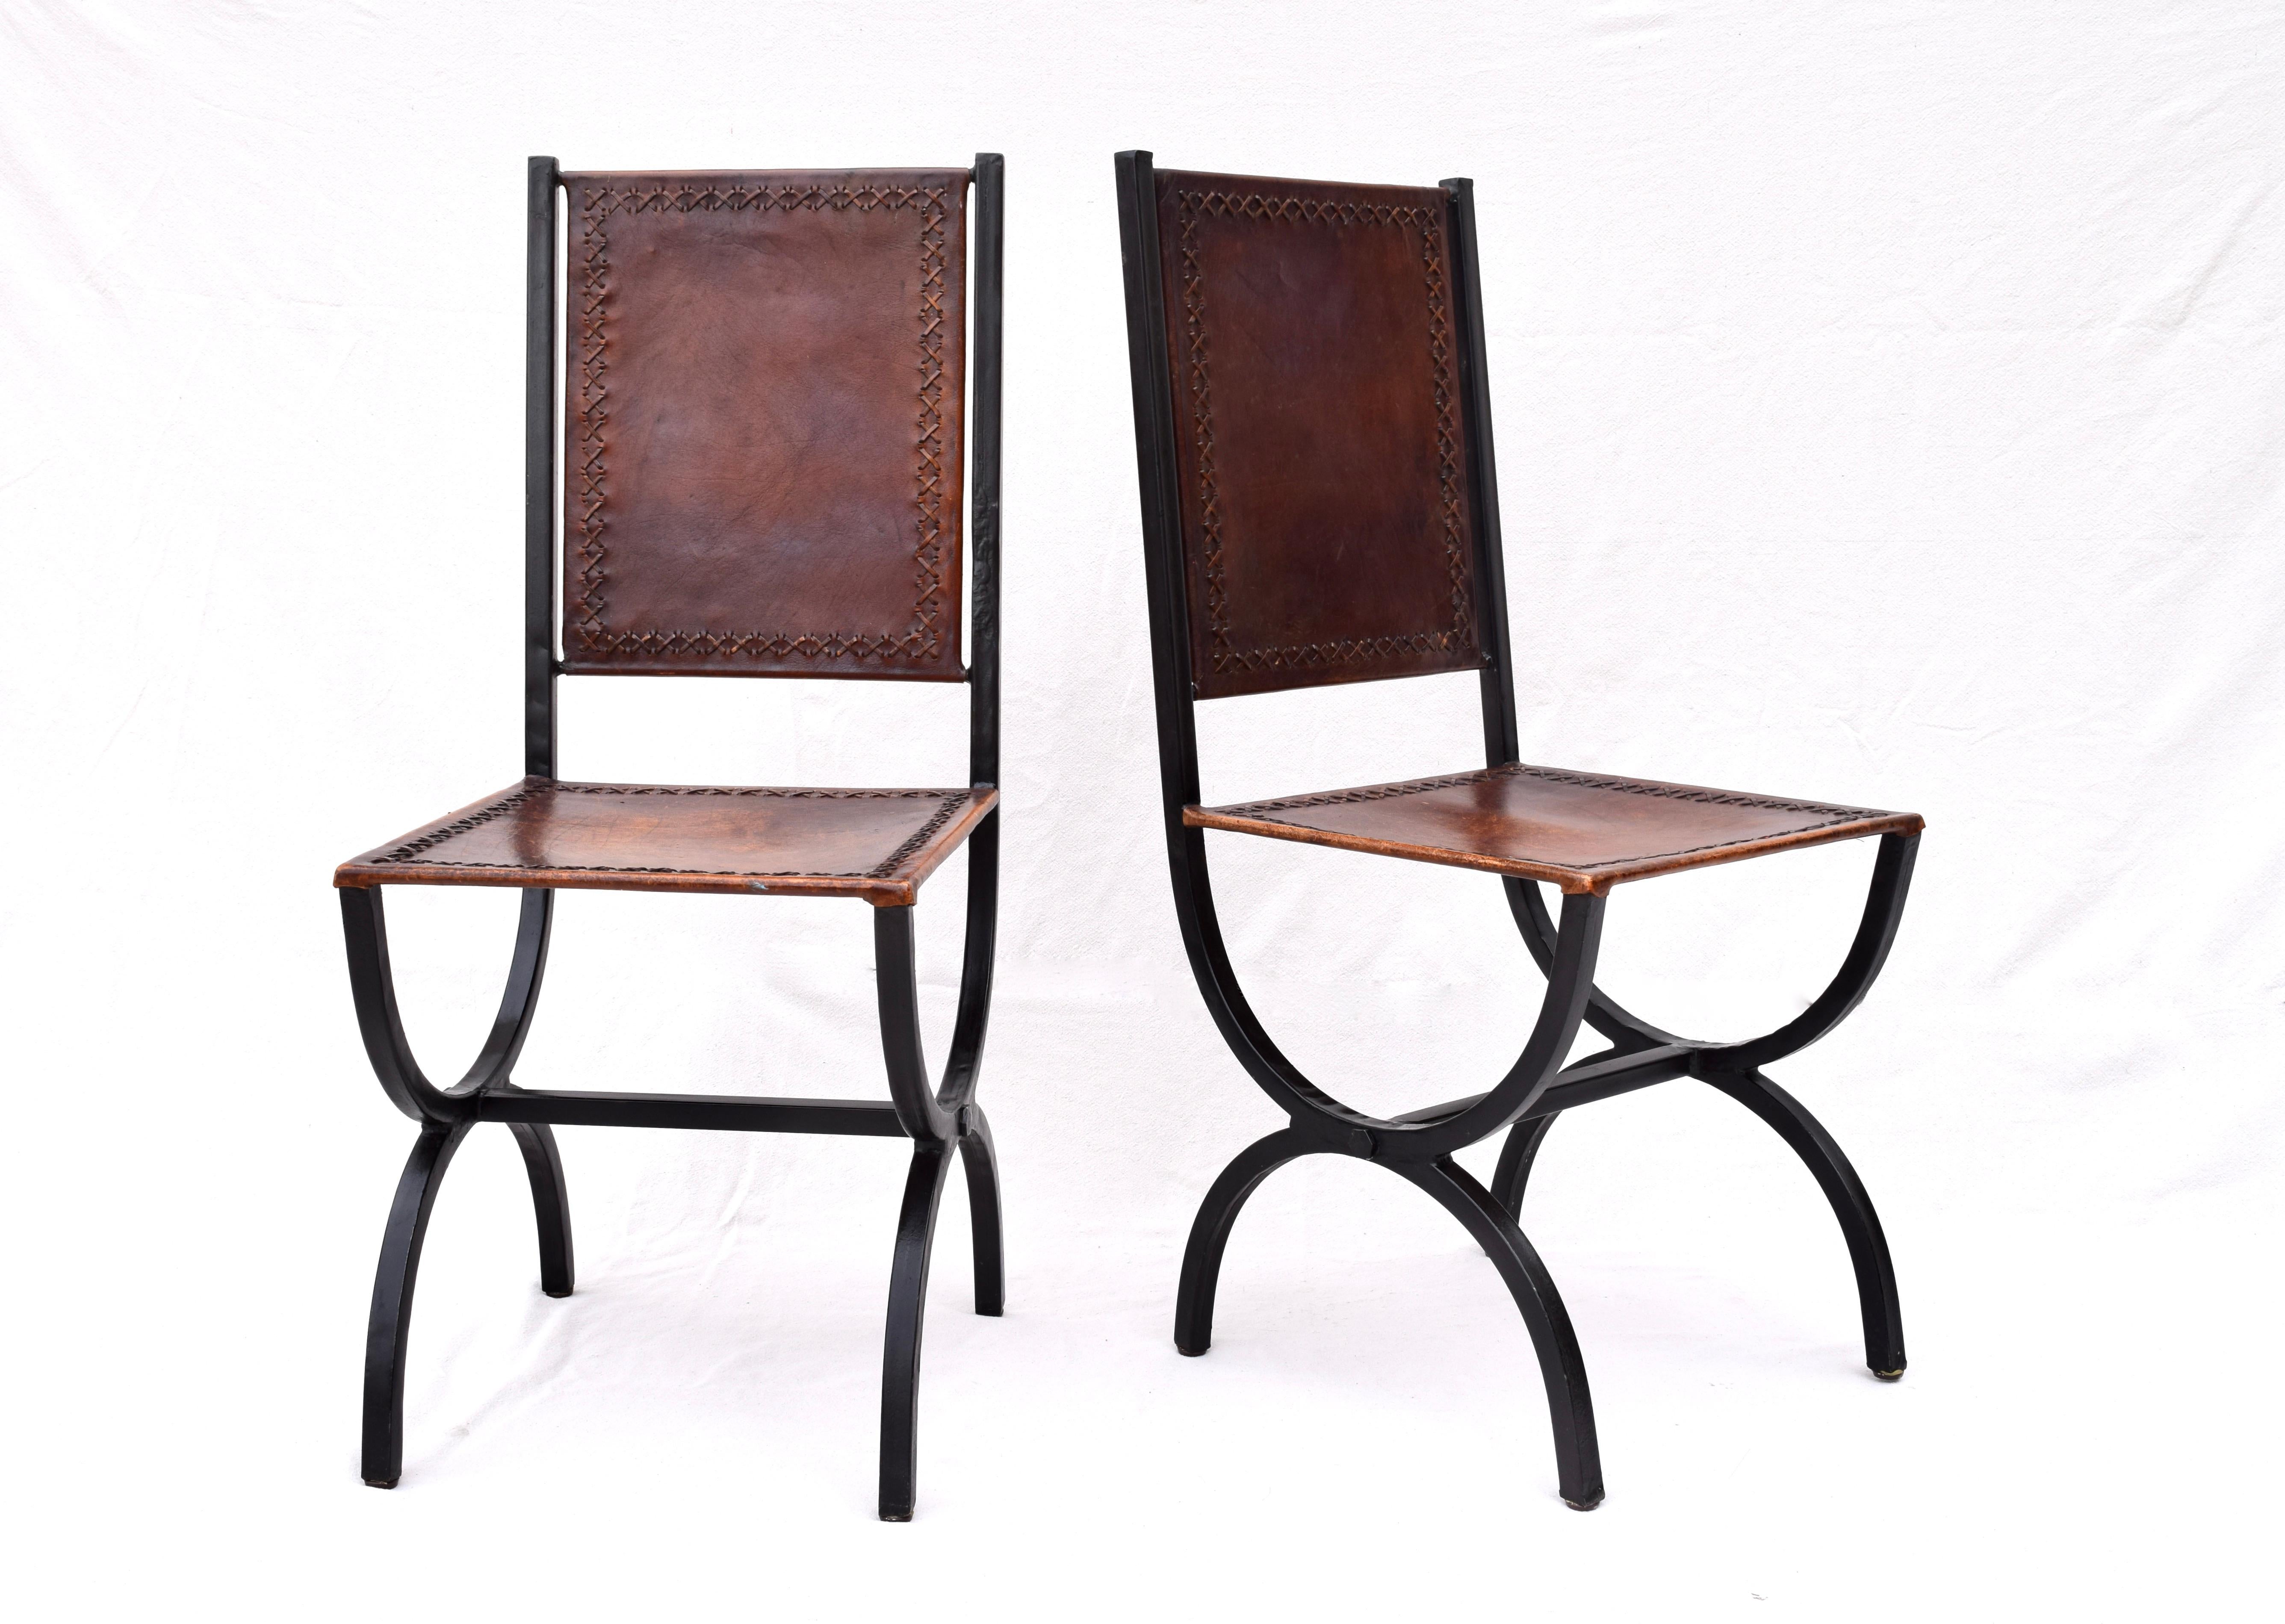 California Napa style brand Iron and leather Curule form dining chairs of rustic style steel and leather with intentionally distressed thick rawhide cross stitch detailing. Very solid and well made, originally purchased in 2008 from California